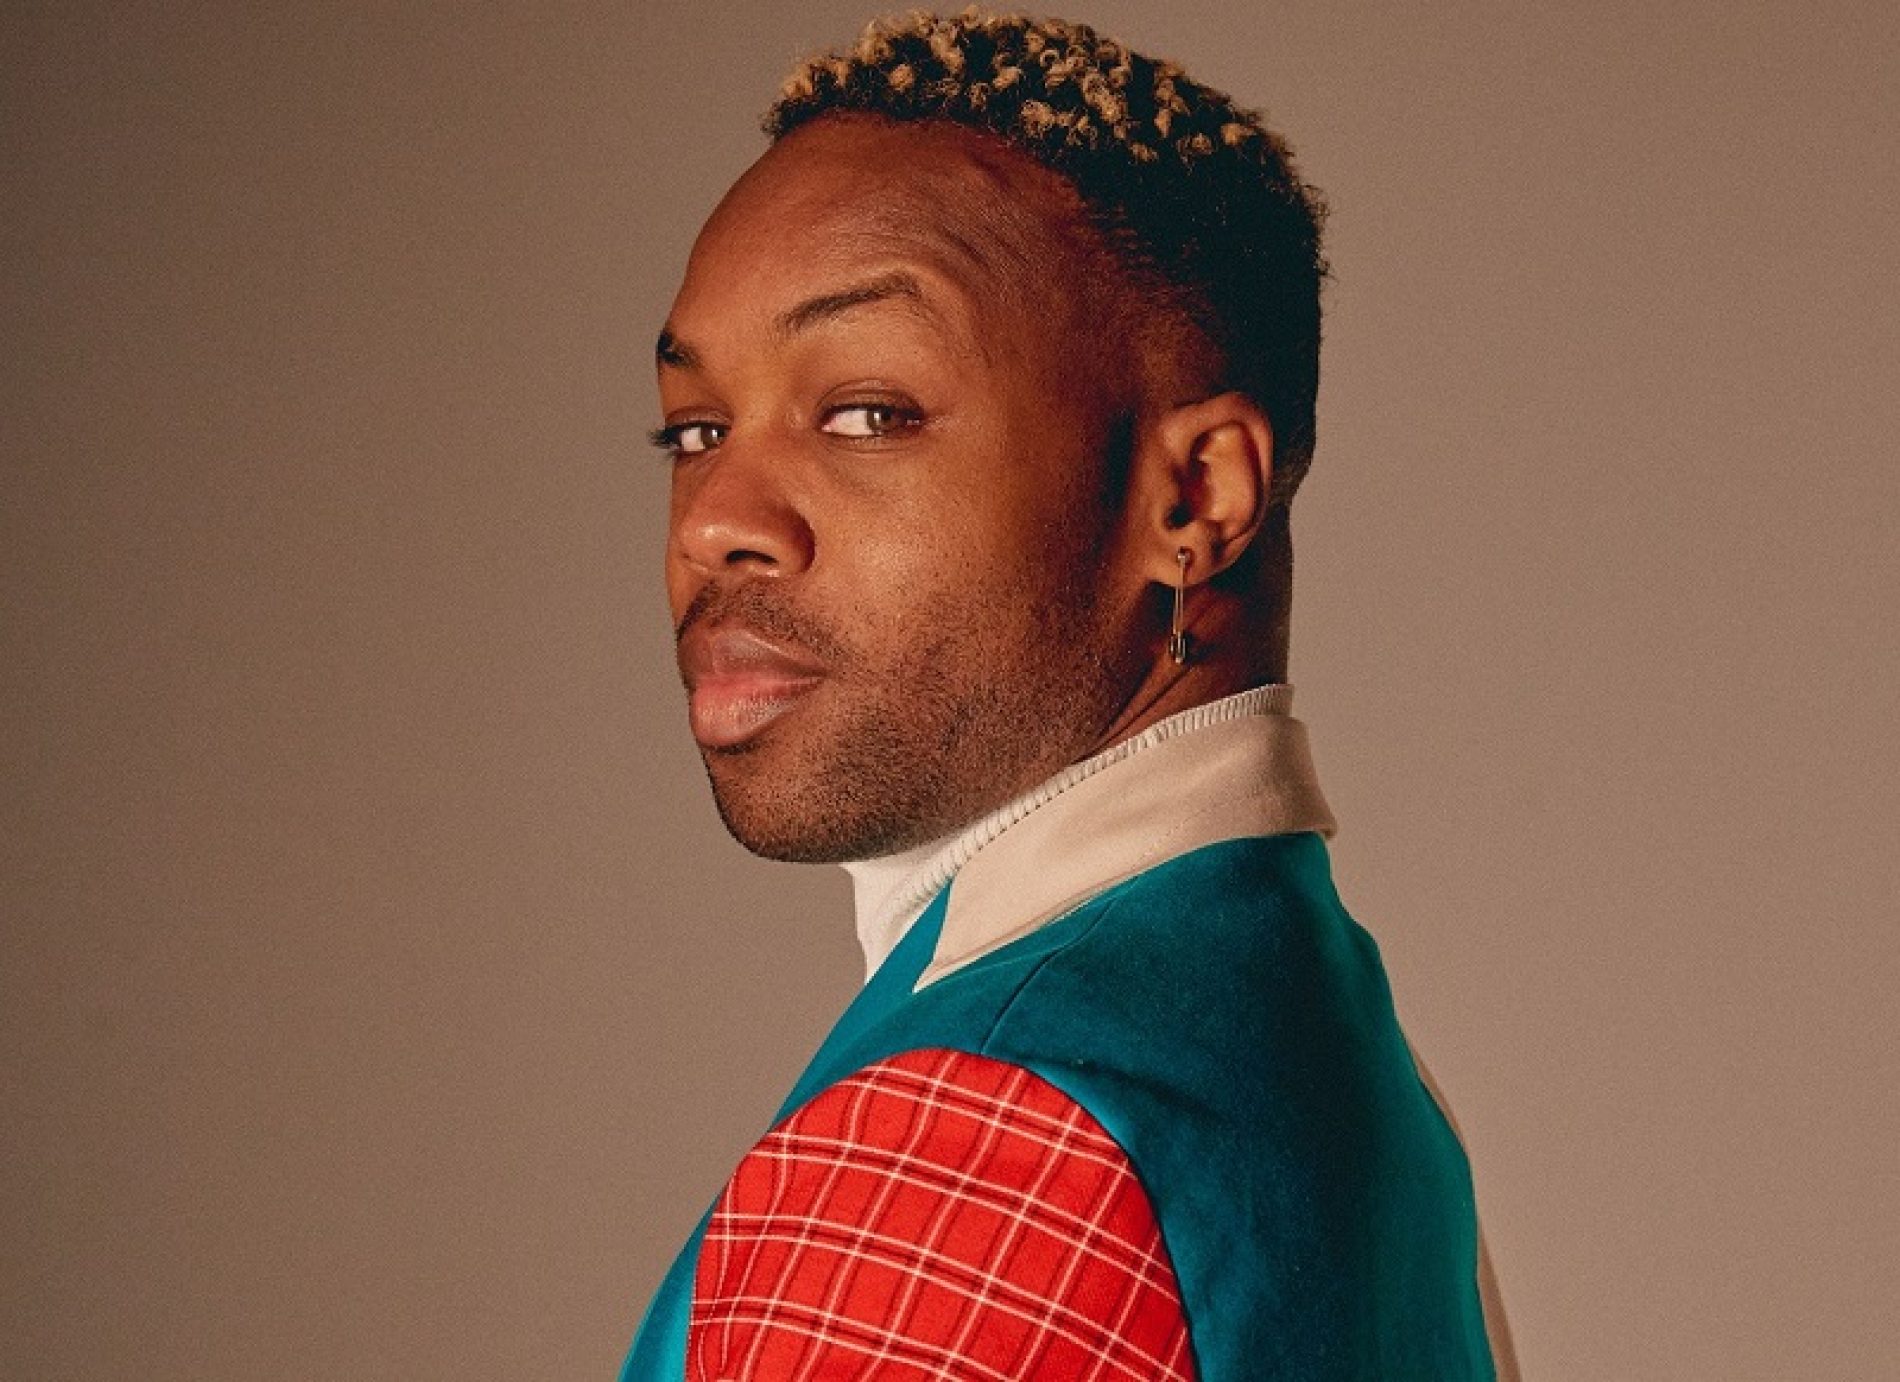 Todrick Hall Speaks Out About The Very Public Allegations He Faced Online, Saying He’ll “Sleep With One Eye Open”